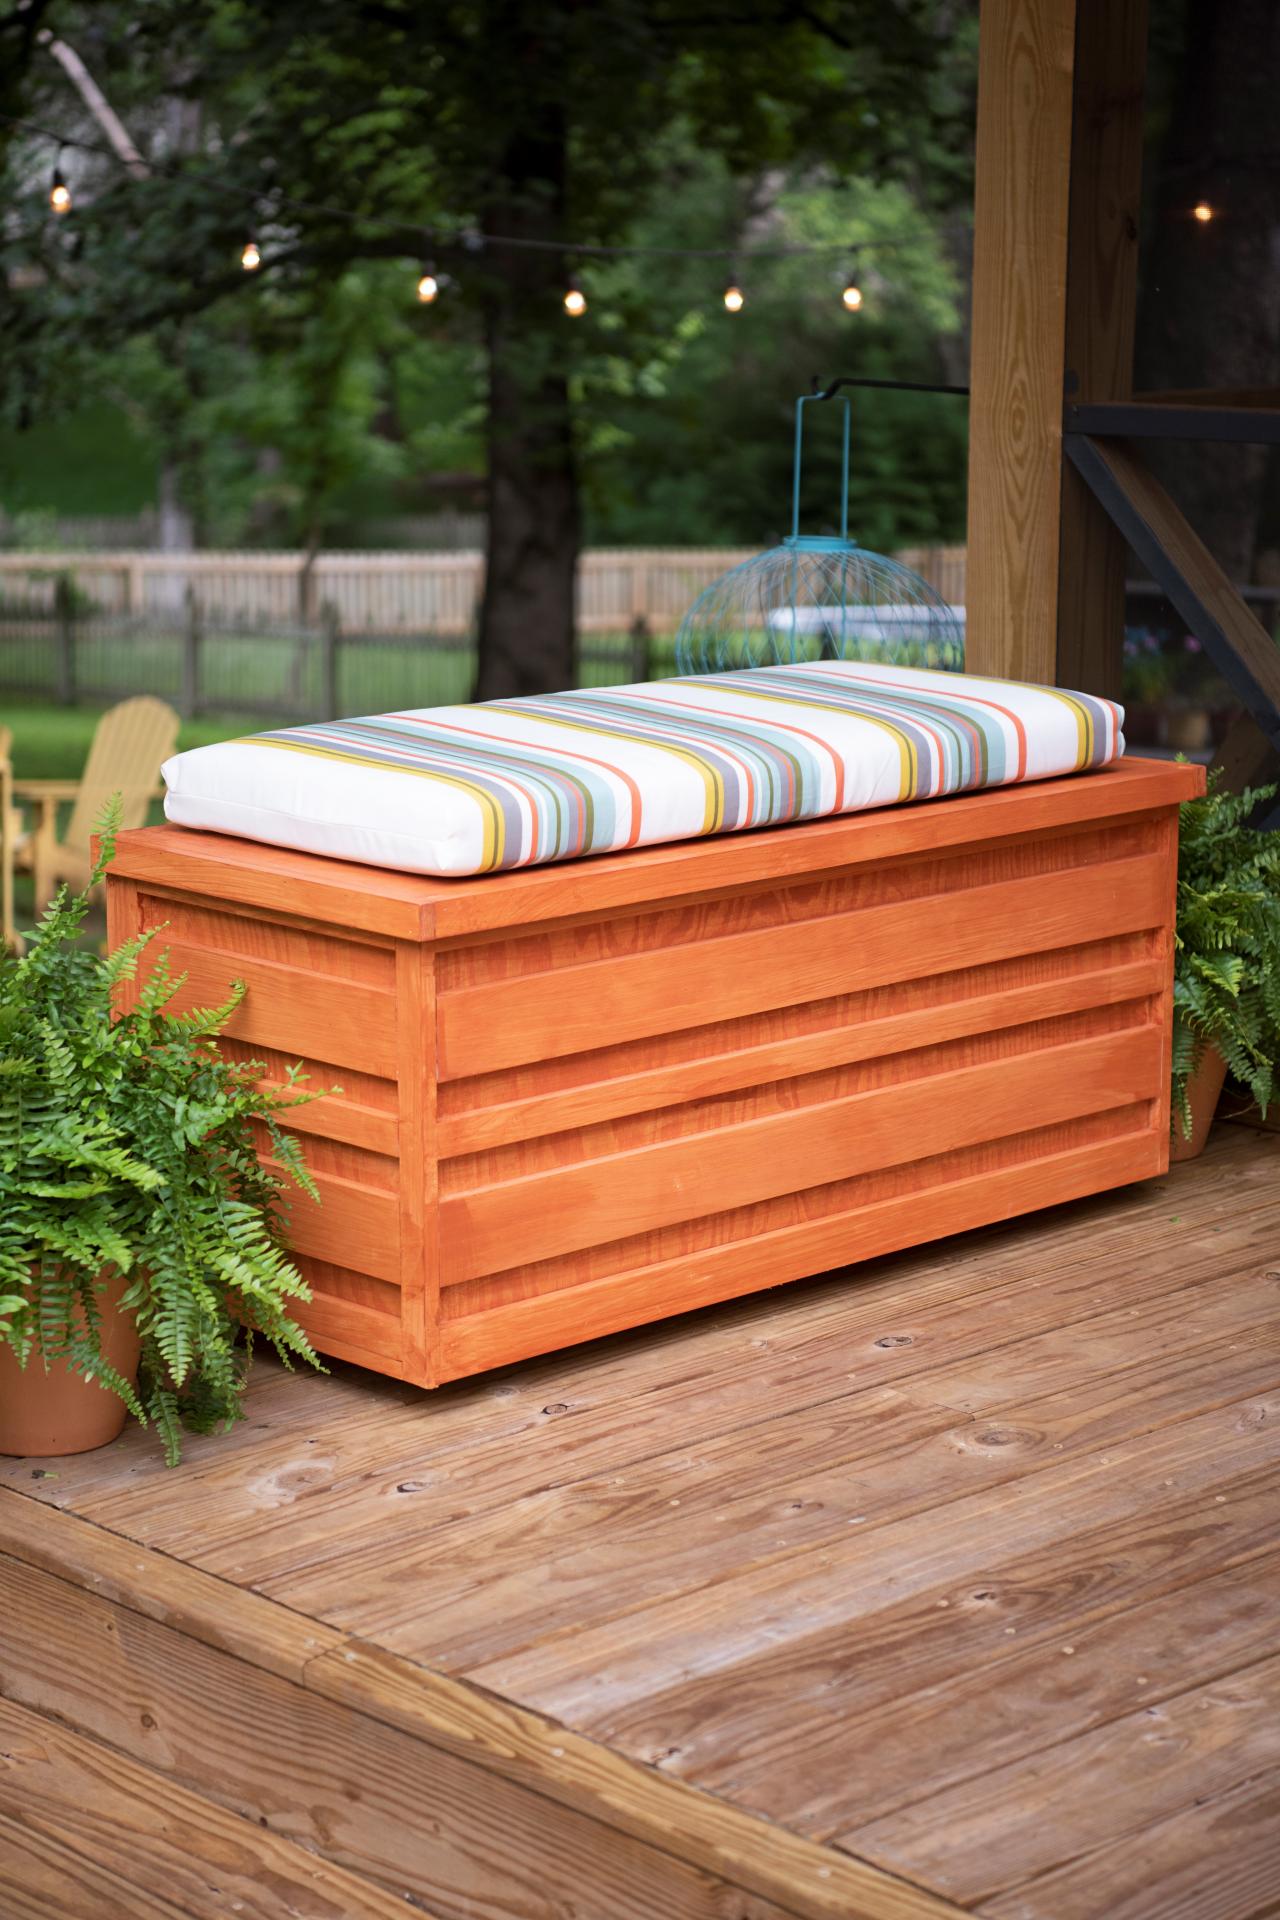 Diy Outdoor Rolling Storage Bench, Outdoor Wood Storage Bench Plans Free